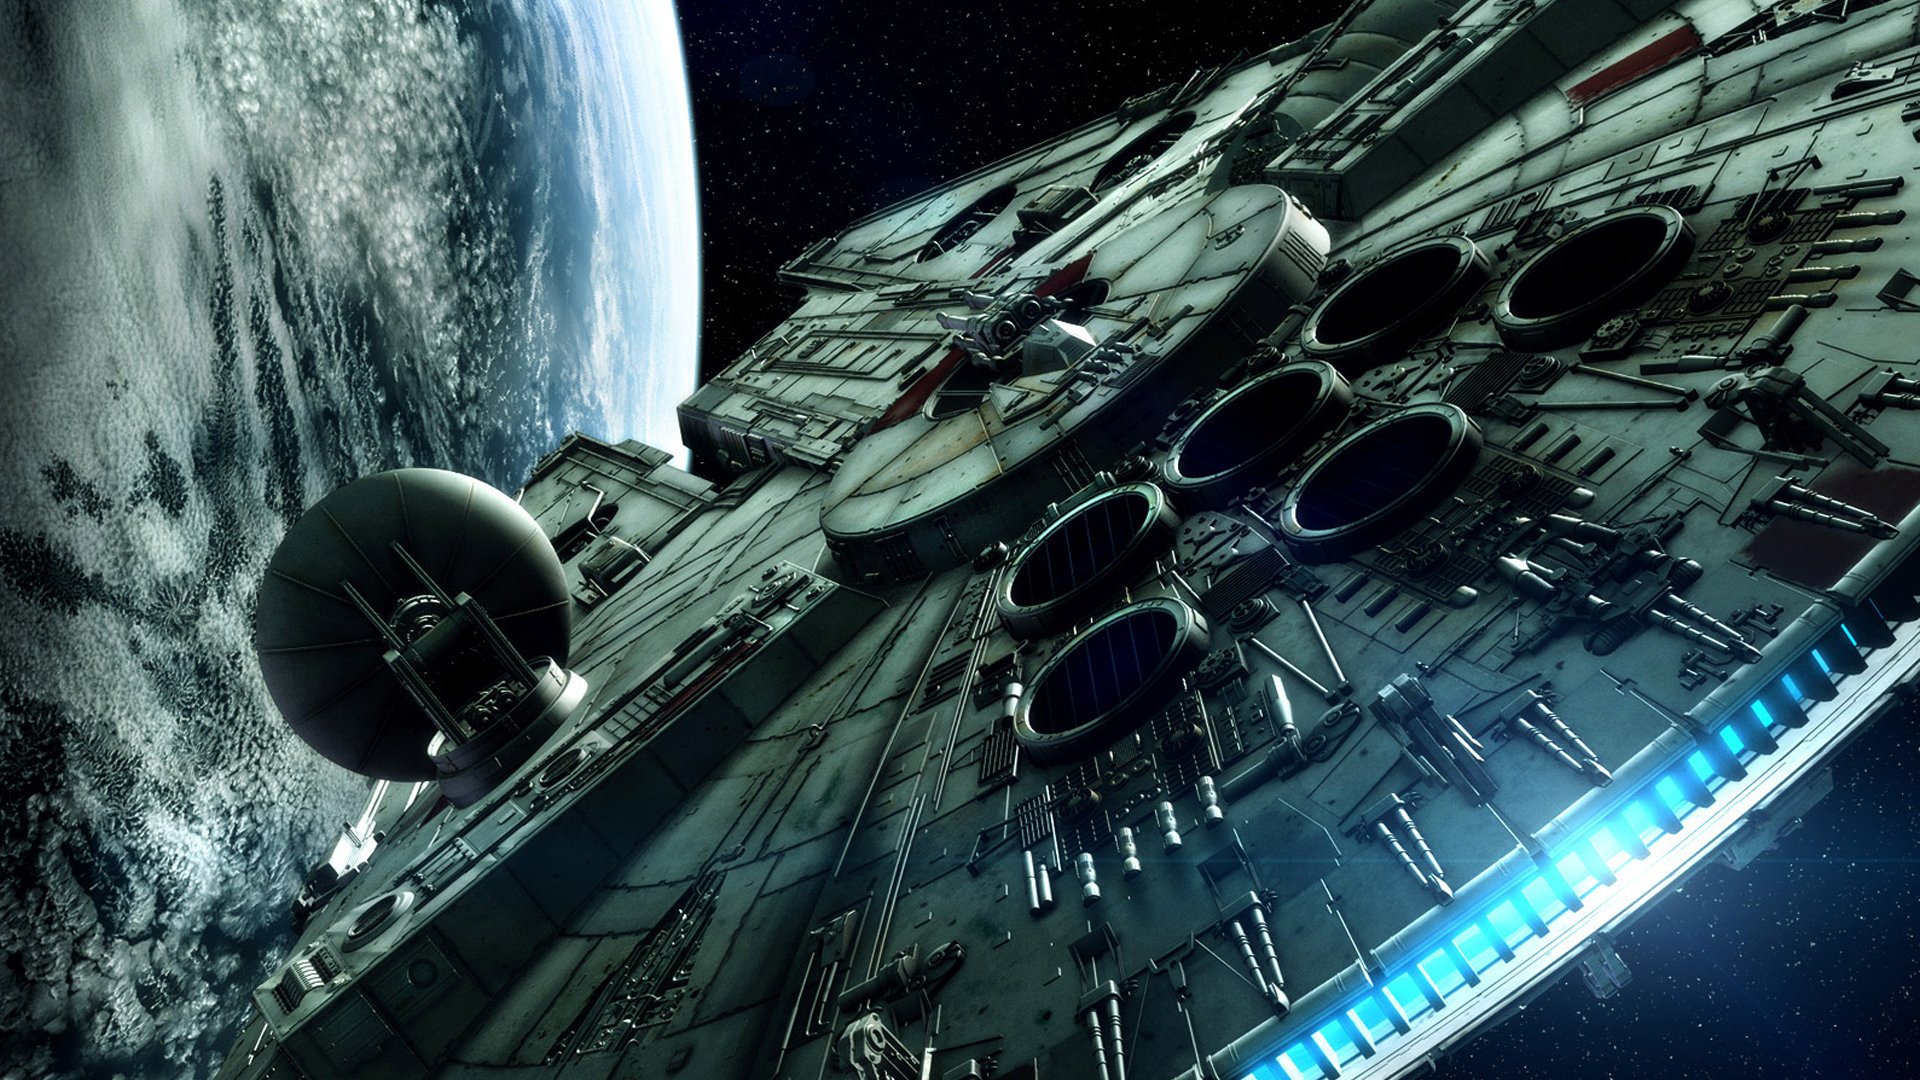  star war movie free download fbulous hd widescreen wallpapers of star 1920x1080